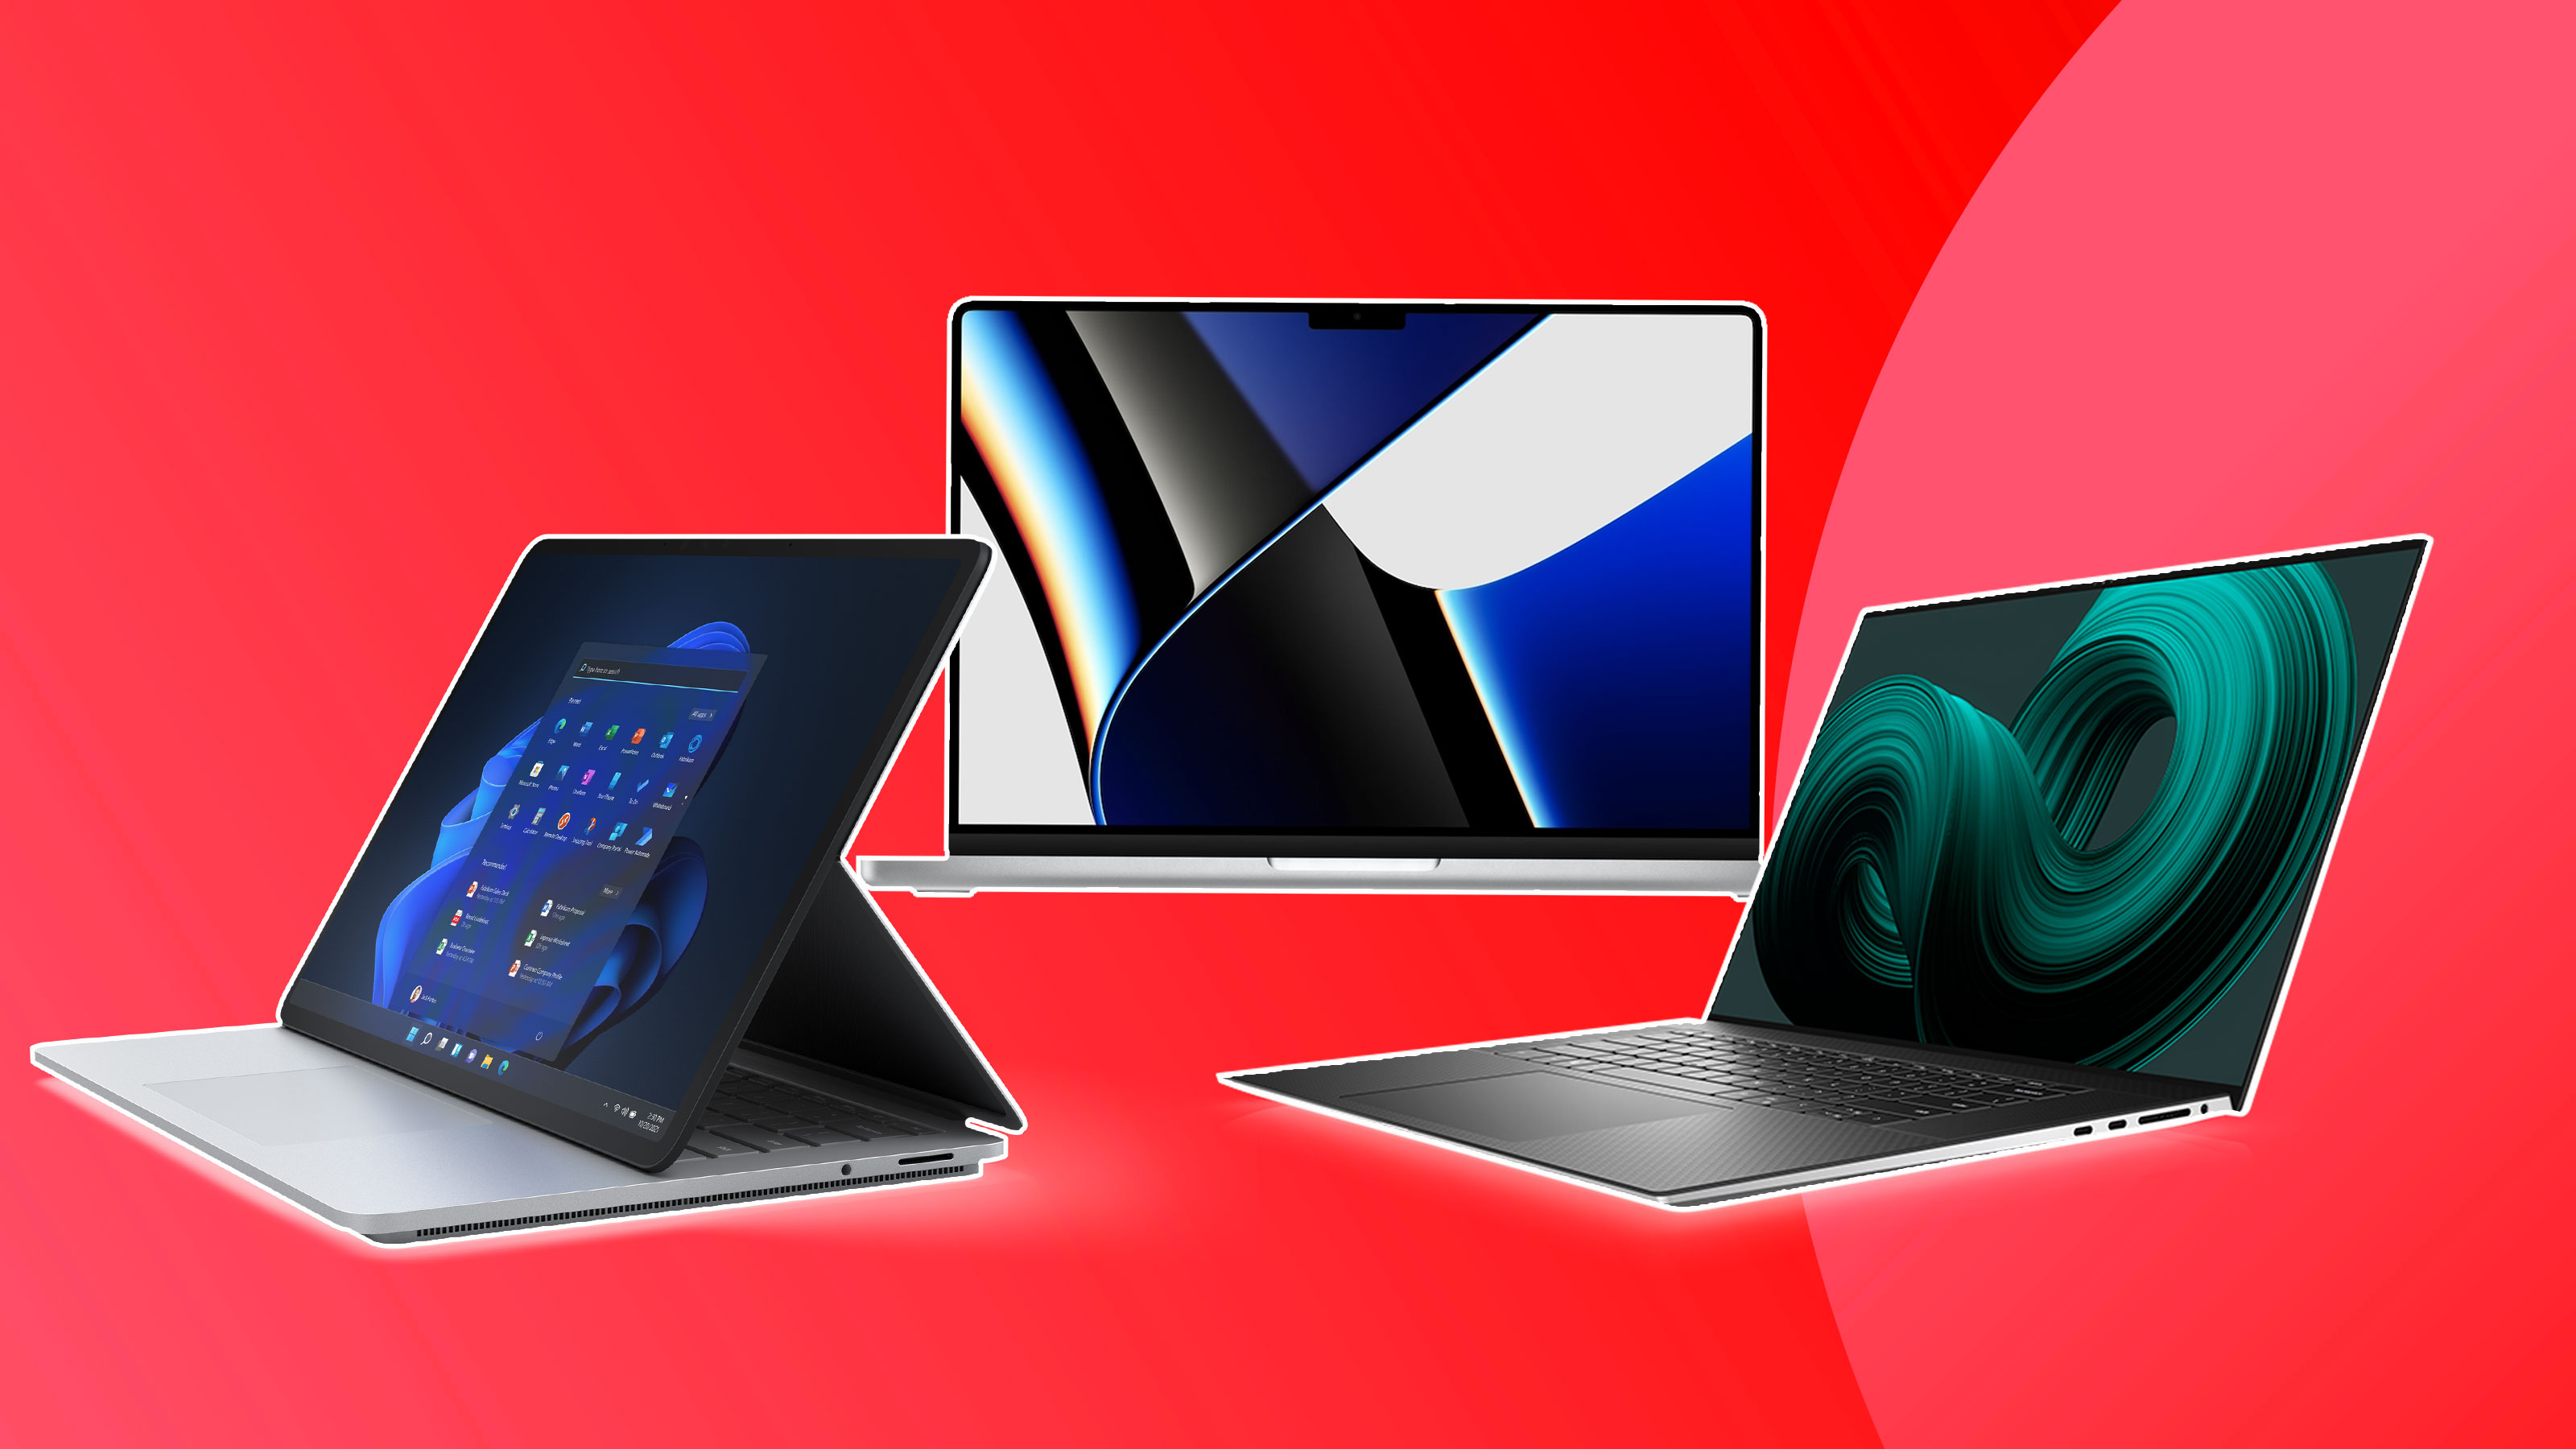 10 best 2-in-1 laptops: From Lenovo to Dell, check out the benefits